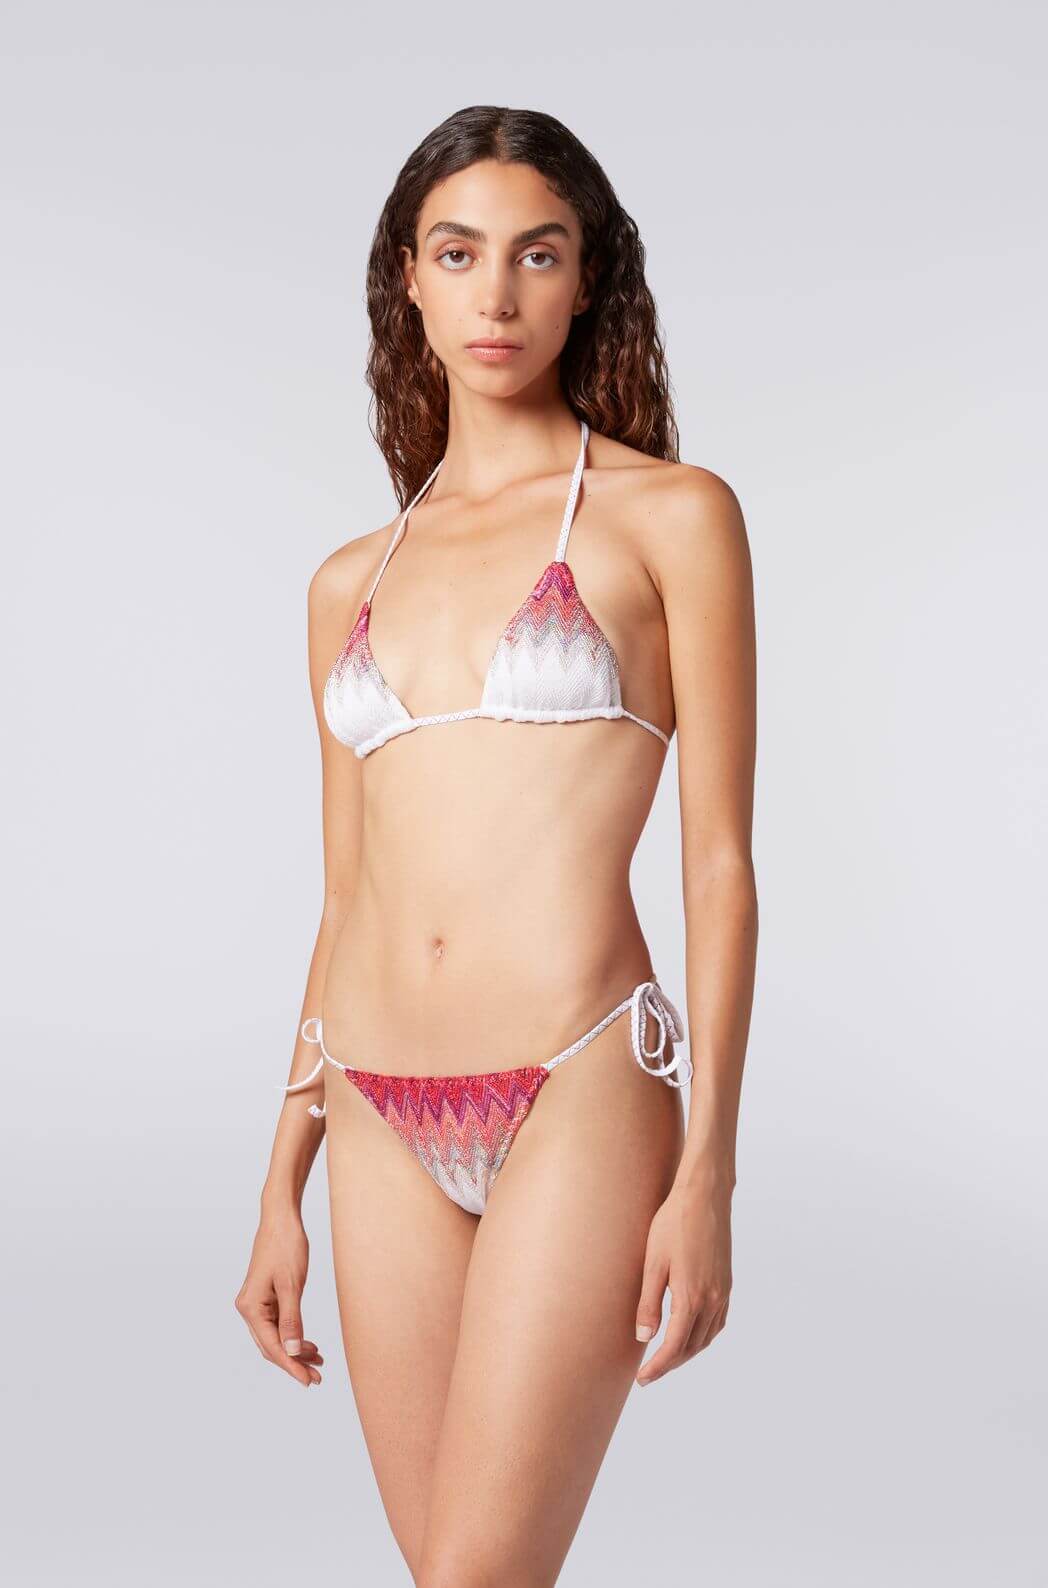 Missoni Mare Zig Zag Tri Bikini in White/Rose/Pink available at TNT The New Trend Australia. Free shipping on orders over $300 AUD.